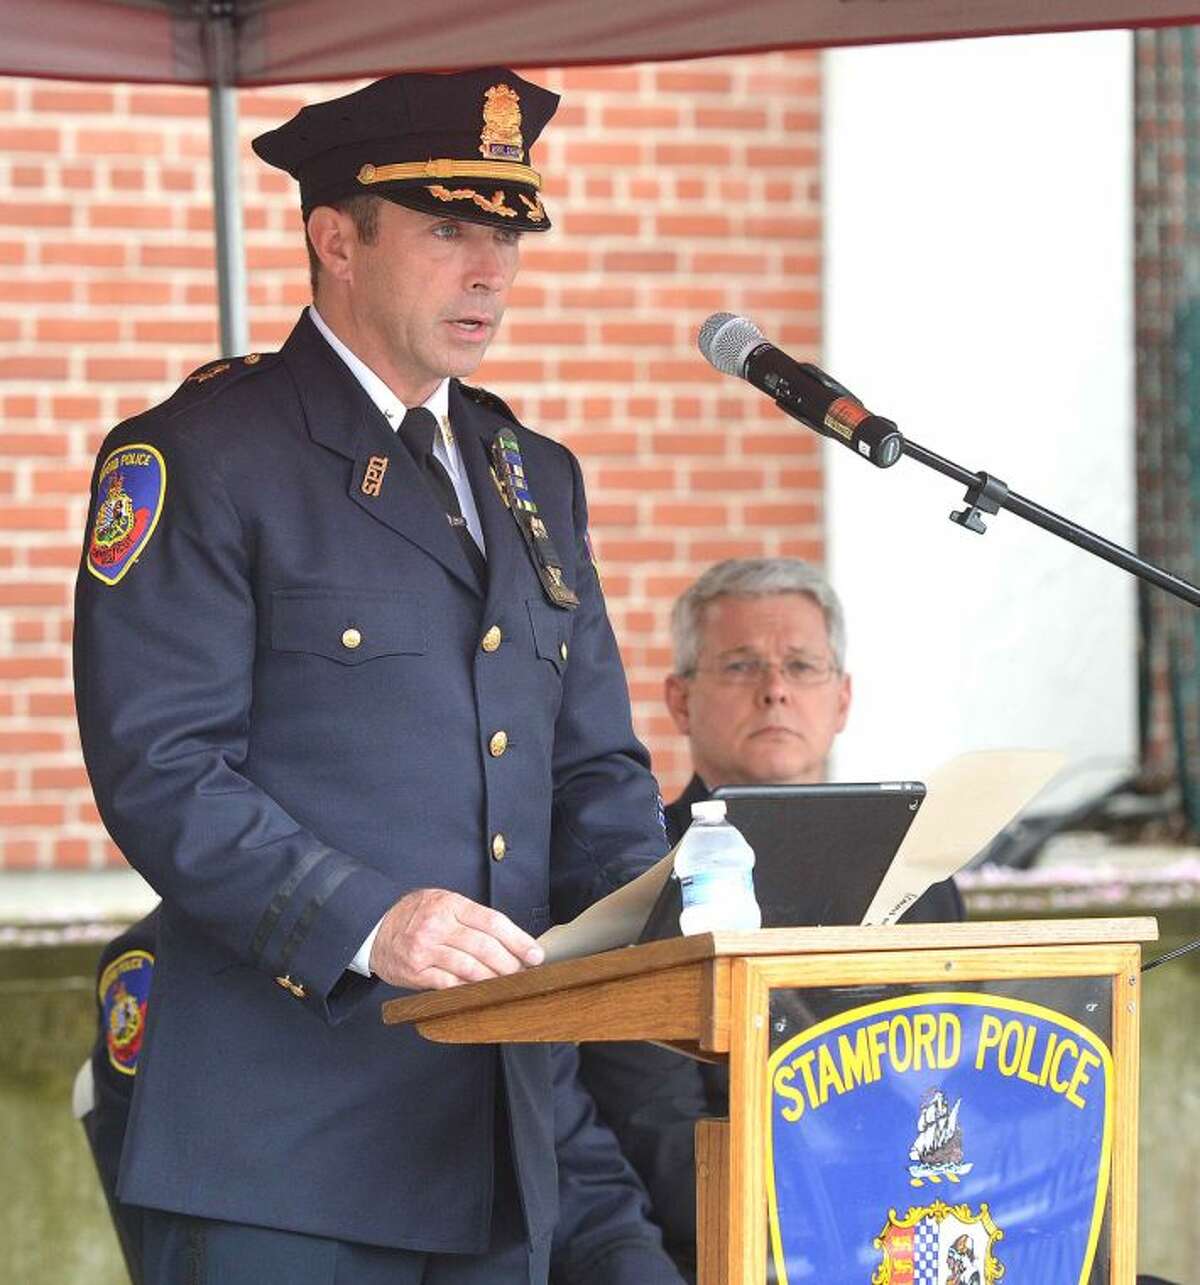 Hour Photo/Alex von Kleydorff Assistant Police Chief James Matheny speaks about how officers risk their lives during Stamford's Peace Office Memorial Day at Headquaters